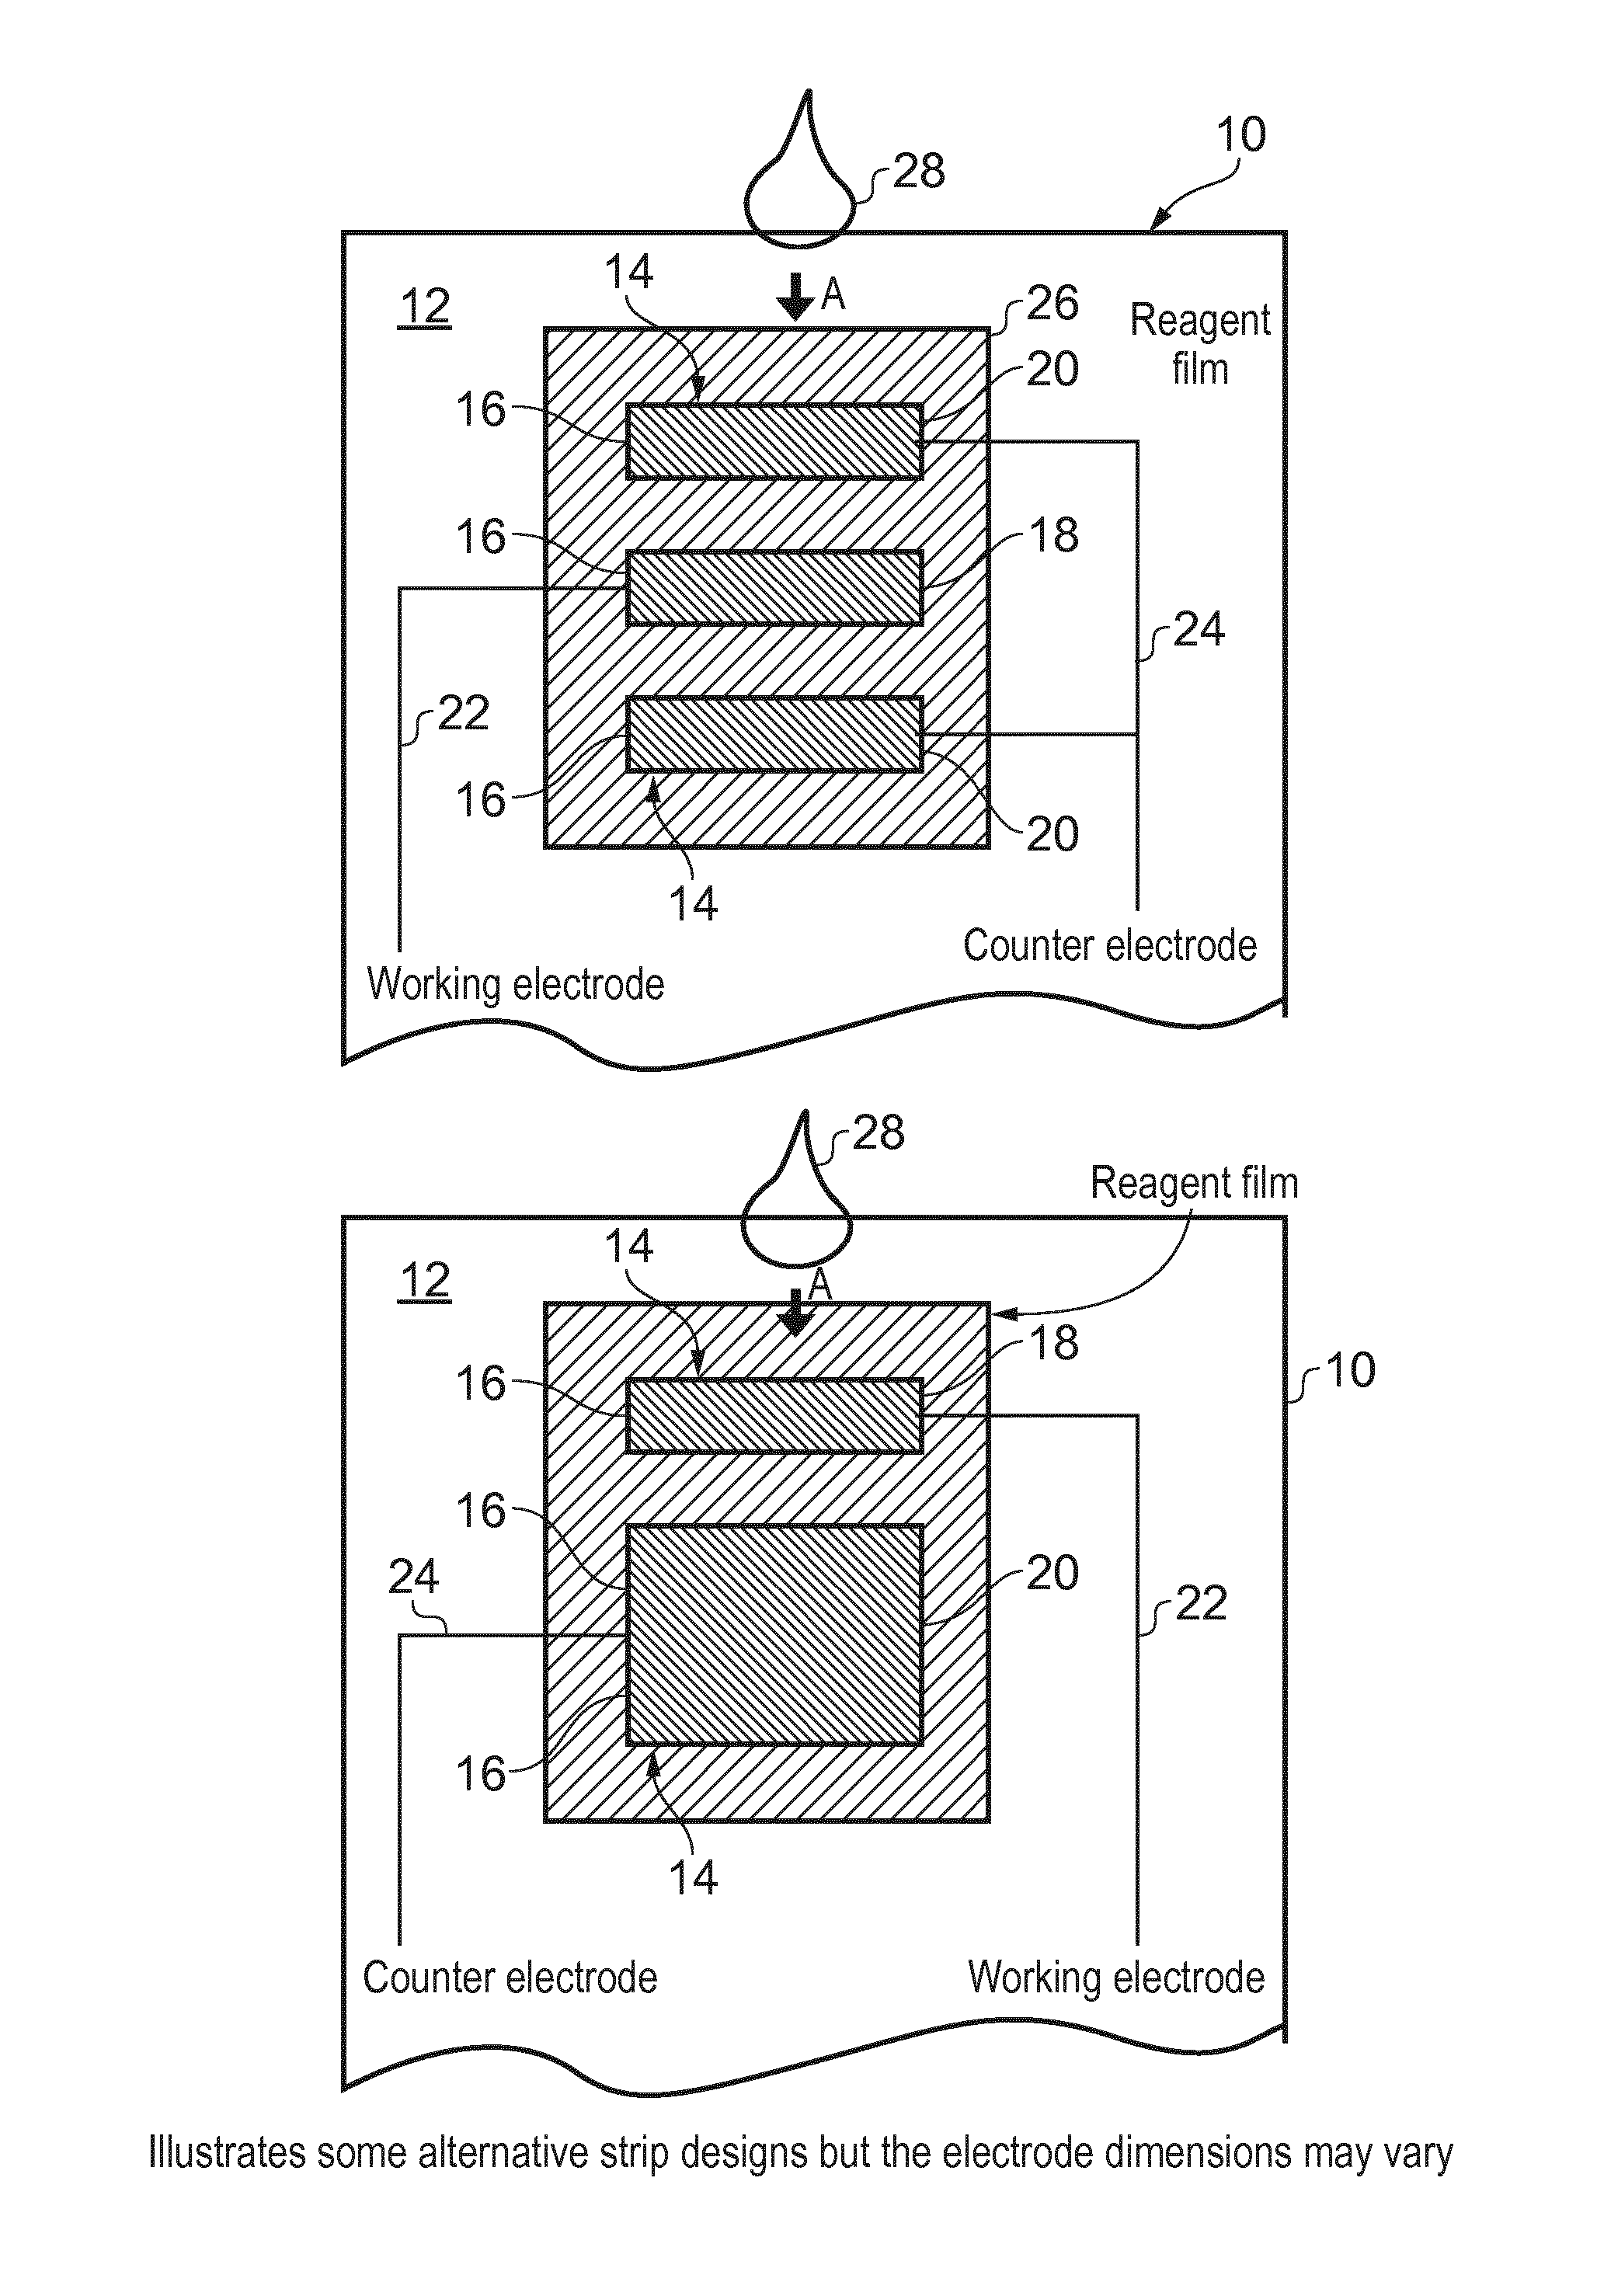 Methods and apparatus for determining analyte in a sample using a sensor having electrodes which are provided with an enzyme and a mediator